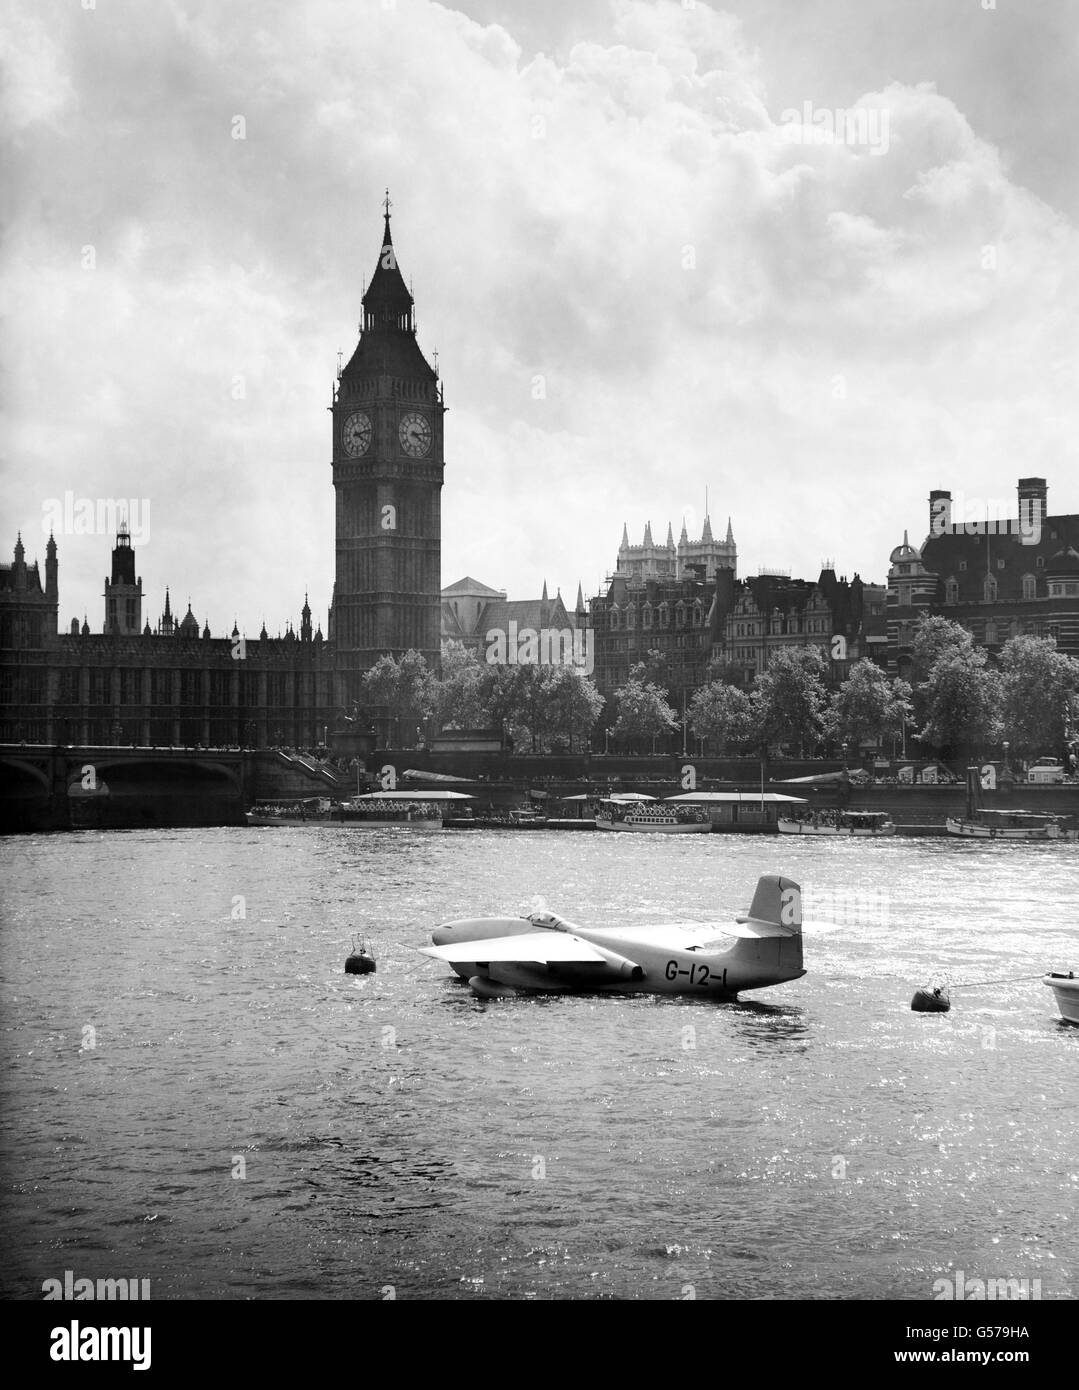 Looking tiny on the broad expanse of the Thames beneath the towering Big Big, the sleek Saunders-Roe A1 - the world's only jet flying boat fighter - is moored off the South Bank Exhibition, London. Stock Photo